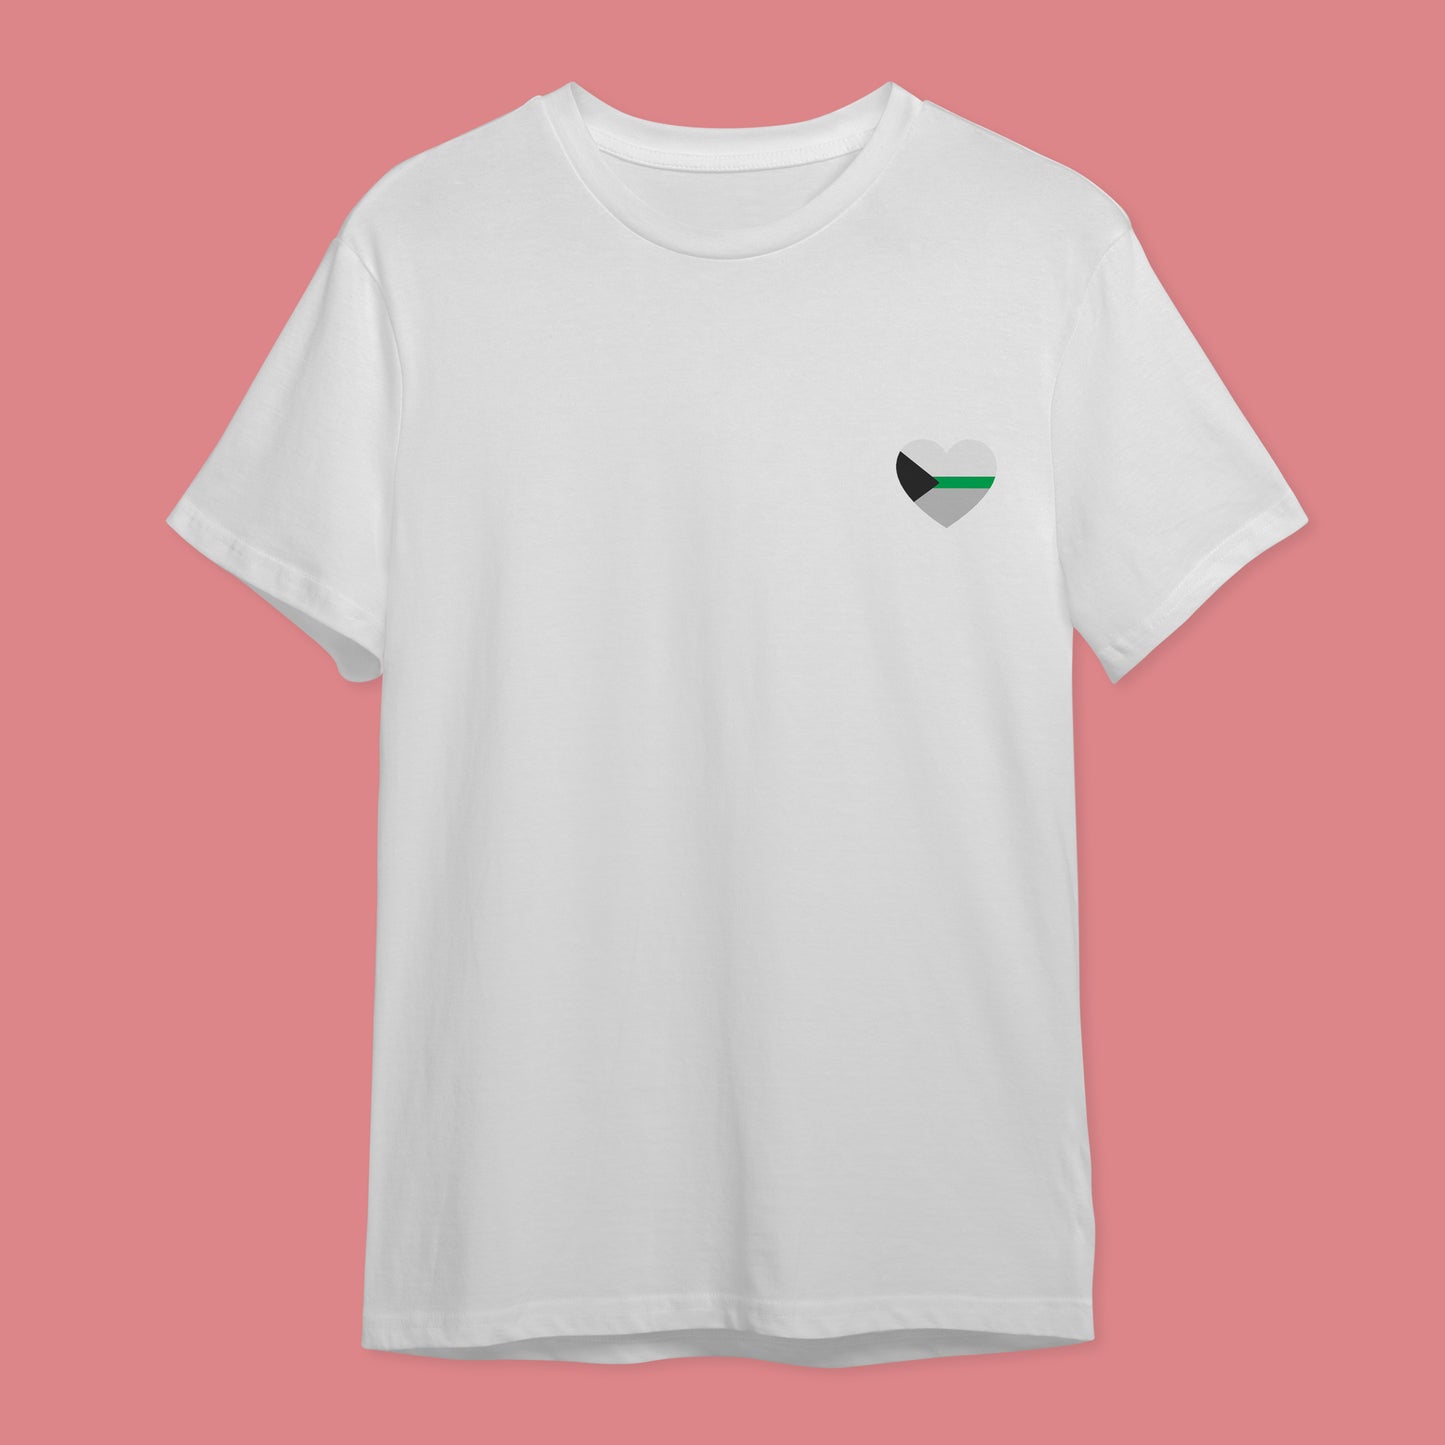 White t-shirt with the four colour demiromantic pride flag in a heart on the right hand side of the chest.